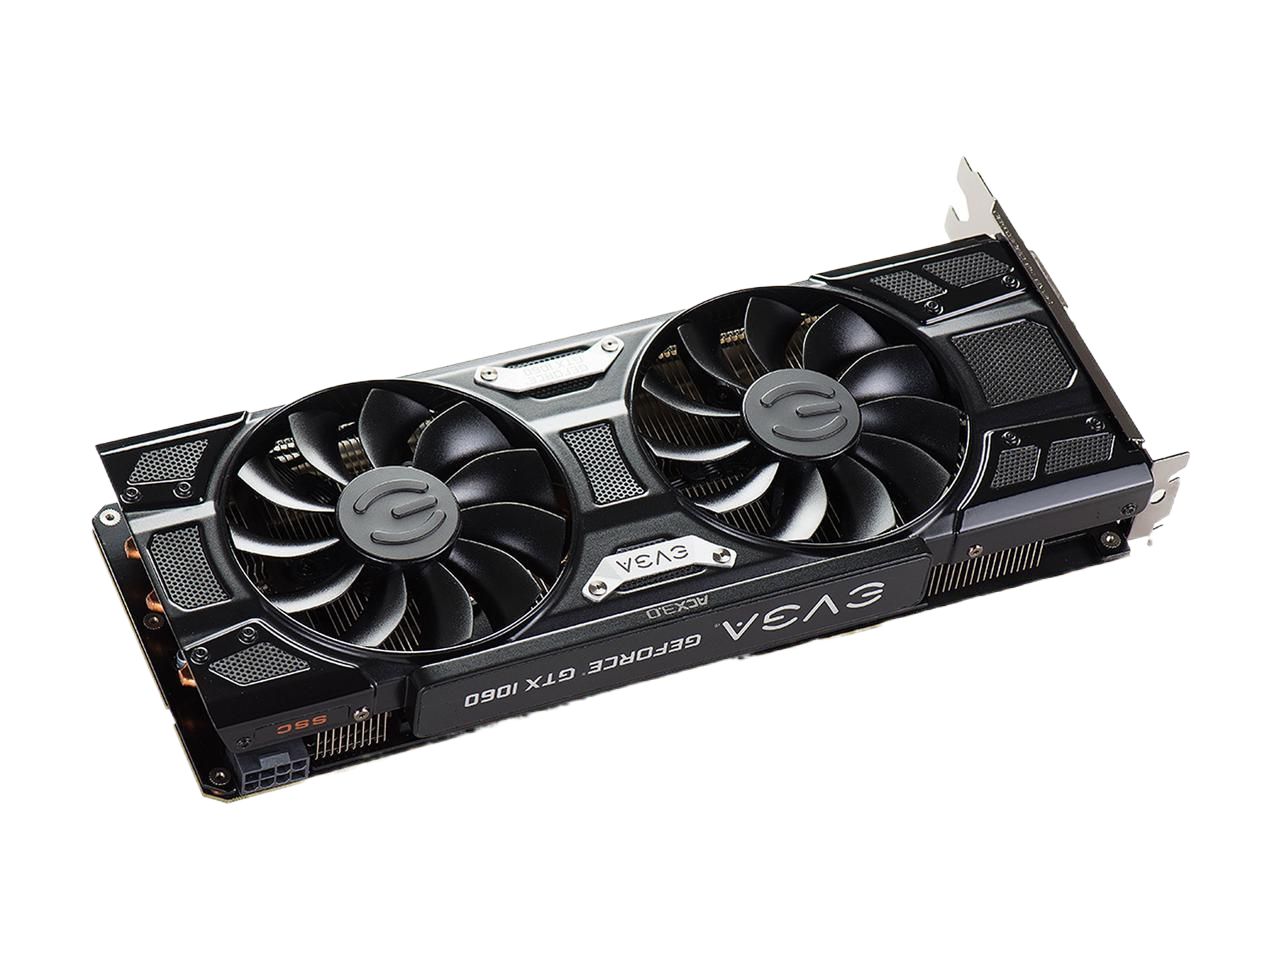 EVGA GeForce GTX 1060 SSC GAMING ACX 3.0 6GB GDDR5 LED DX12 OSD Support (PXOC) Video Graphics Card 06G-P4-6267-KR